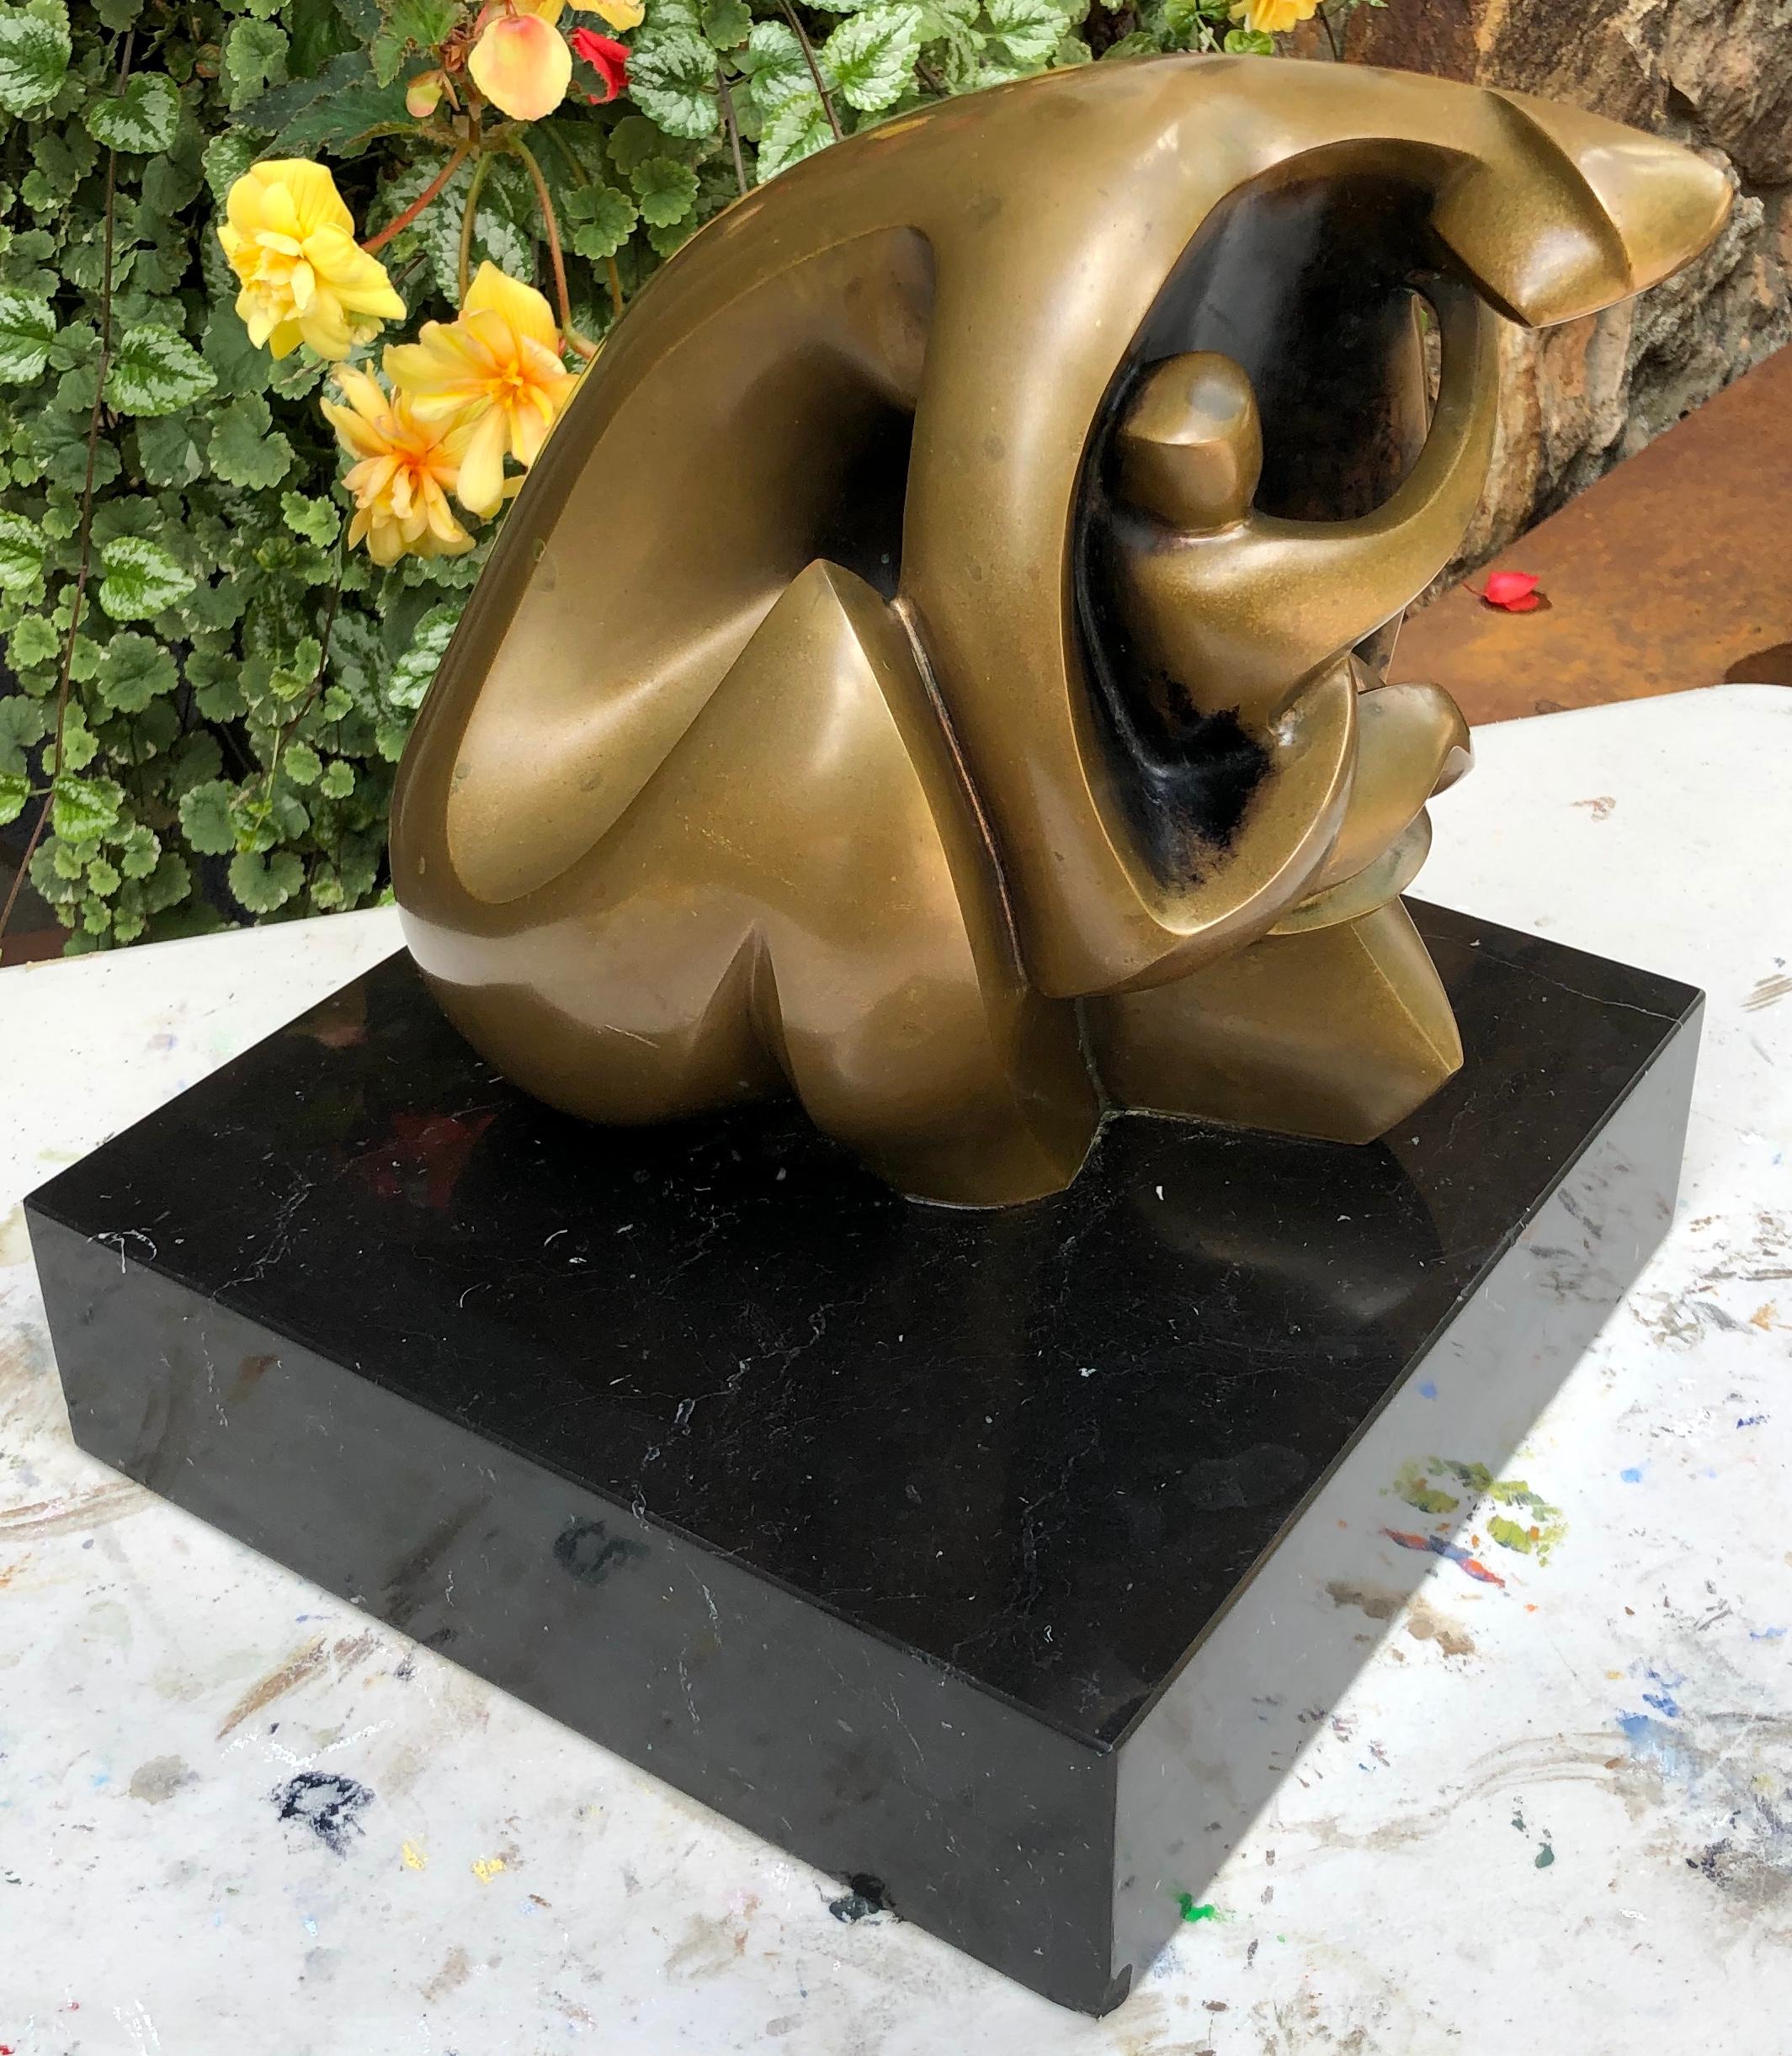 Signed and numbered 6/9. On marble base. In overall very good condition. Some patina and oxidation to bronze. Two small chips to base on two lower corners that do not detract from the overall appearance.

Isaac Kahn was born in Lithuania in 1950.